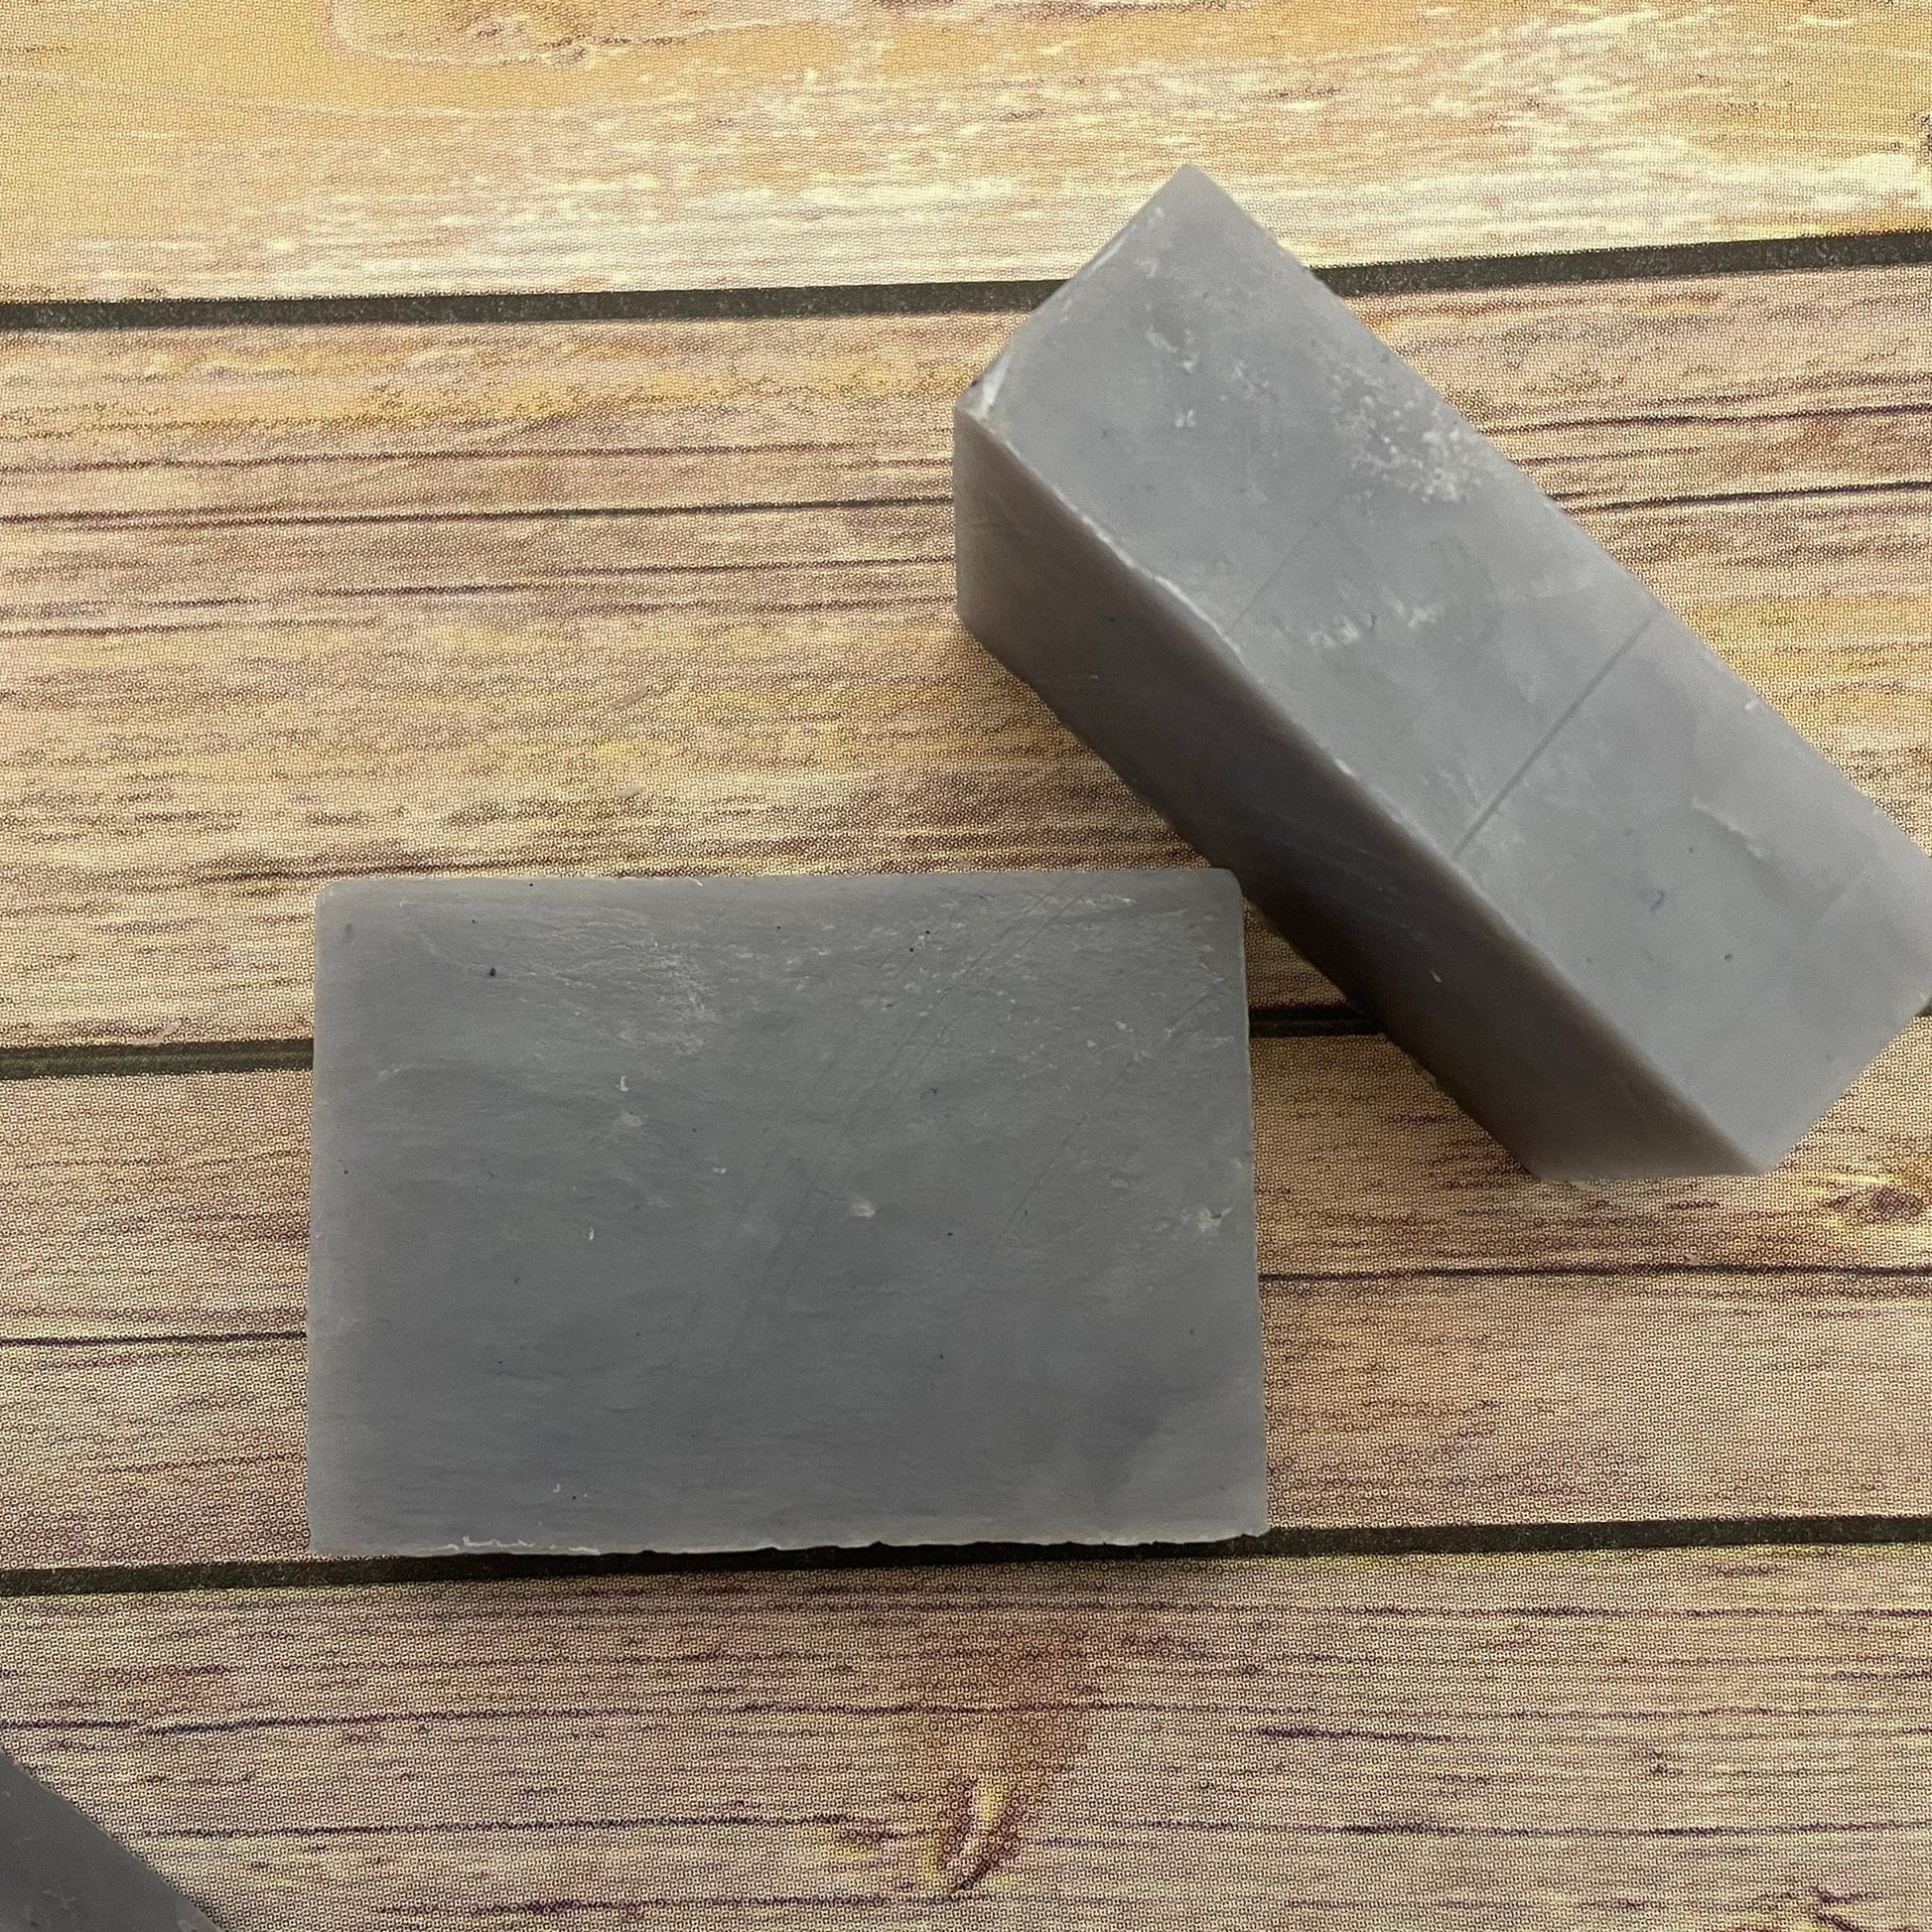 Lavender Bar Soap | Natural Soap | Organic Soap | Gifts for Her | Gifts for Mom